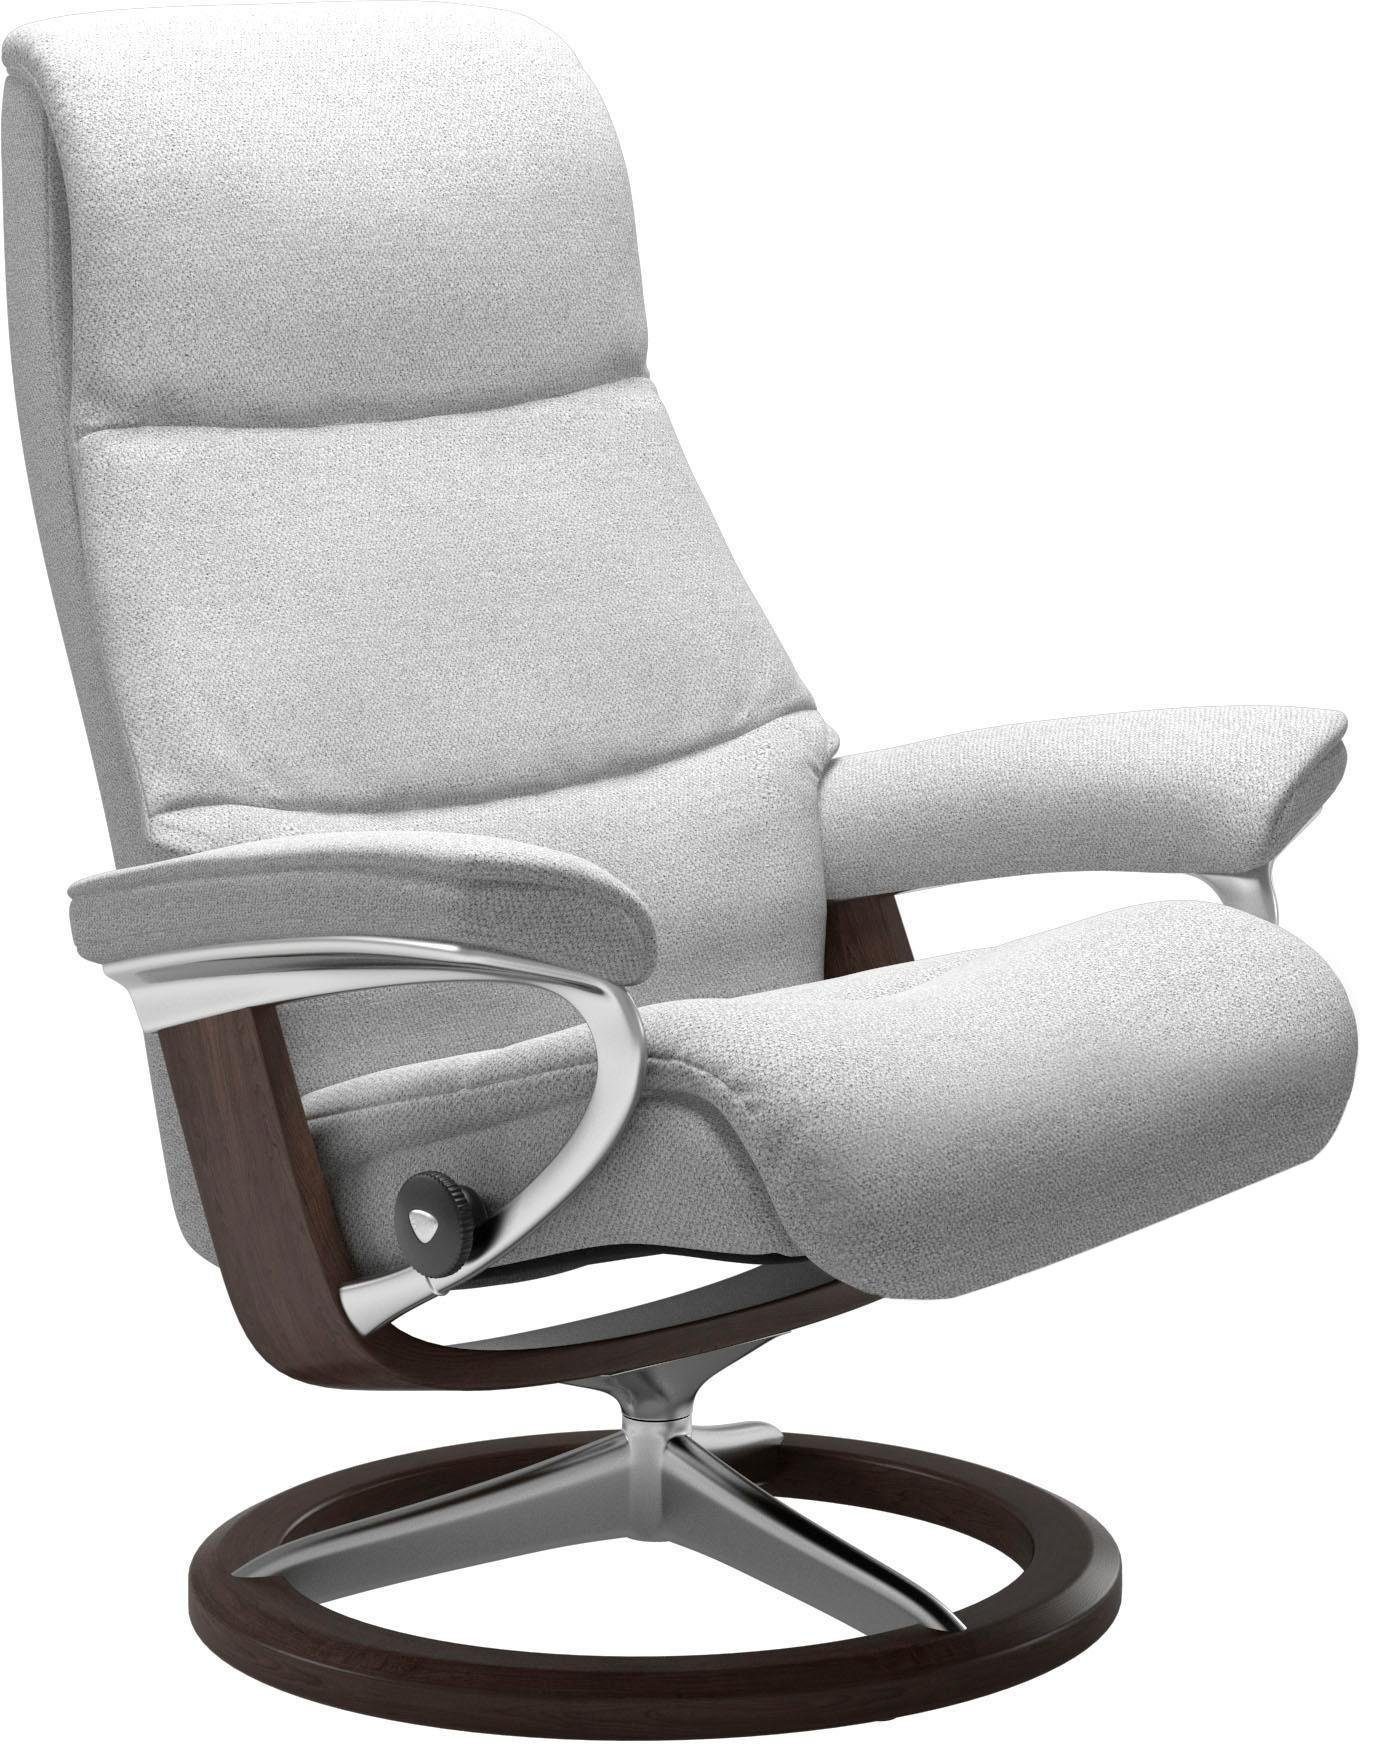 Signature S,Gestell View, Wenge Base, Relaxsessel Stressless® mit Größe